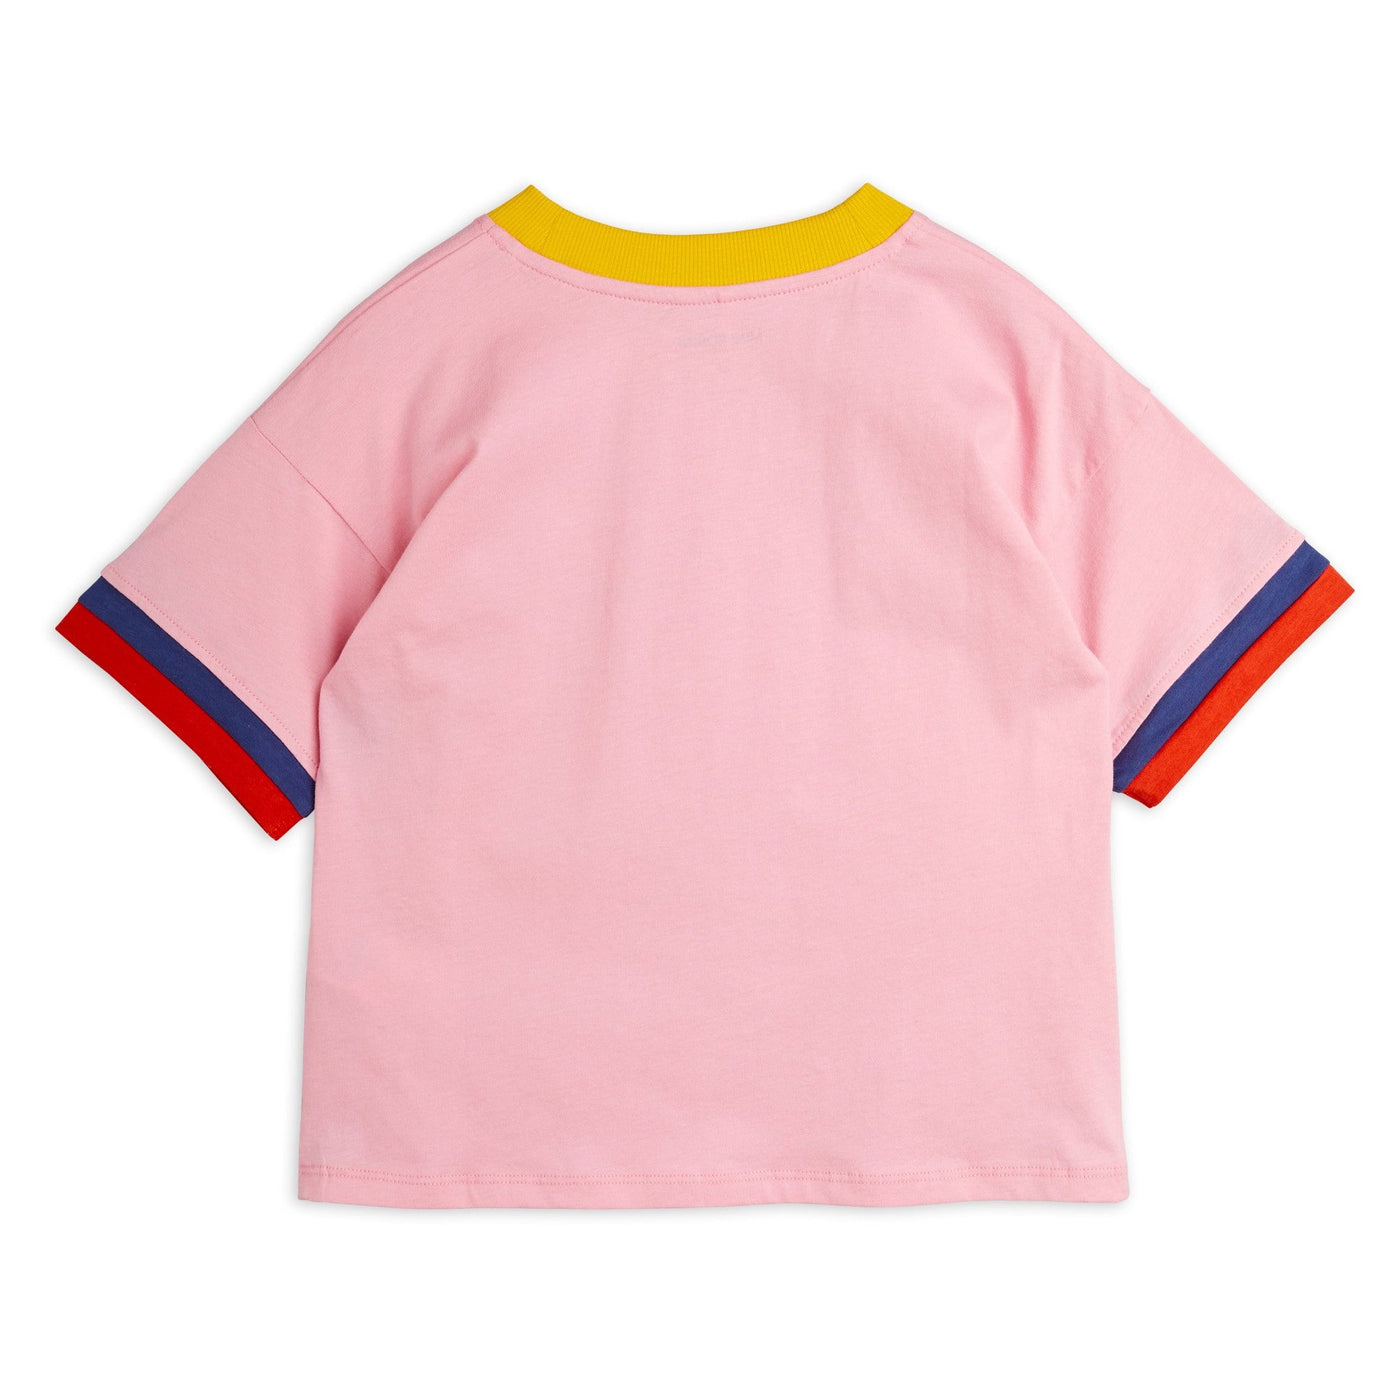 Super Sporty T-Shirt in Pink by Mini Rodini - Petite Belle